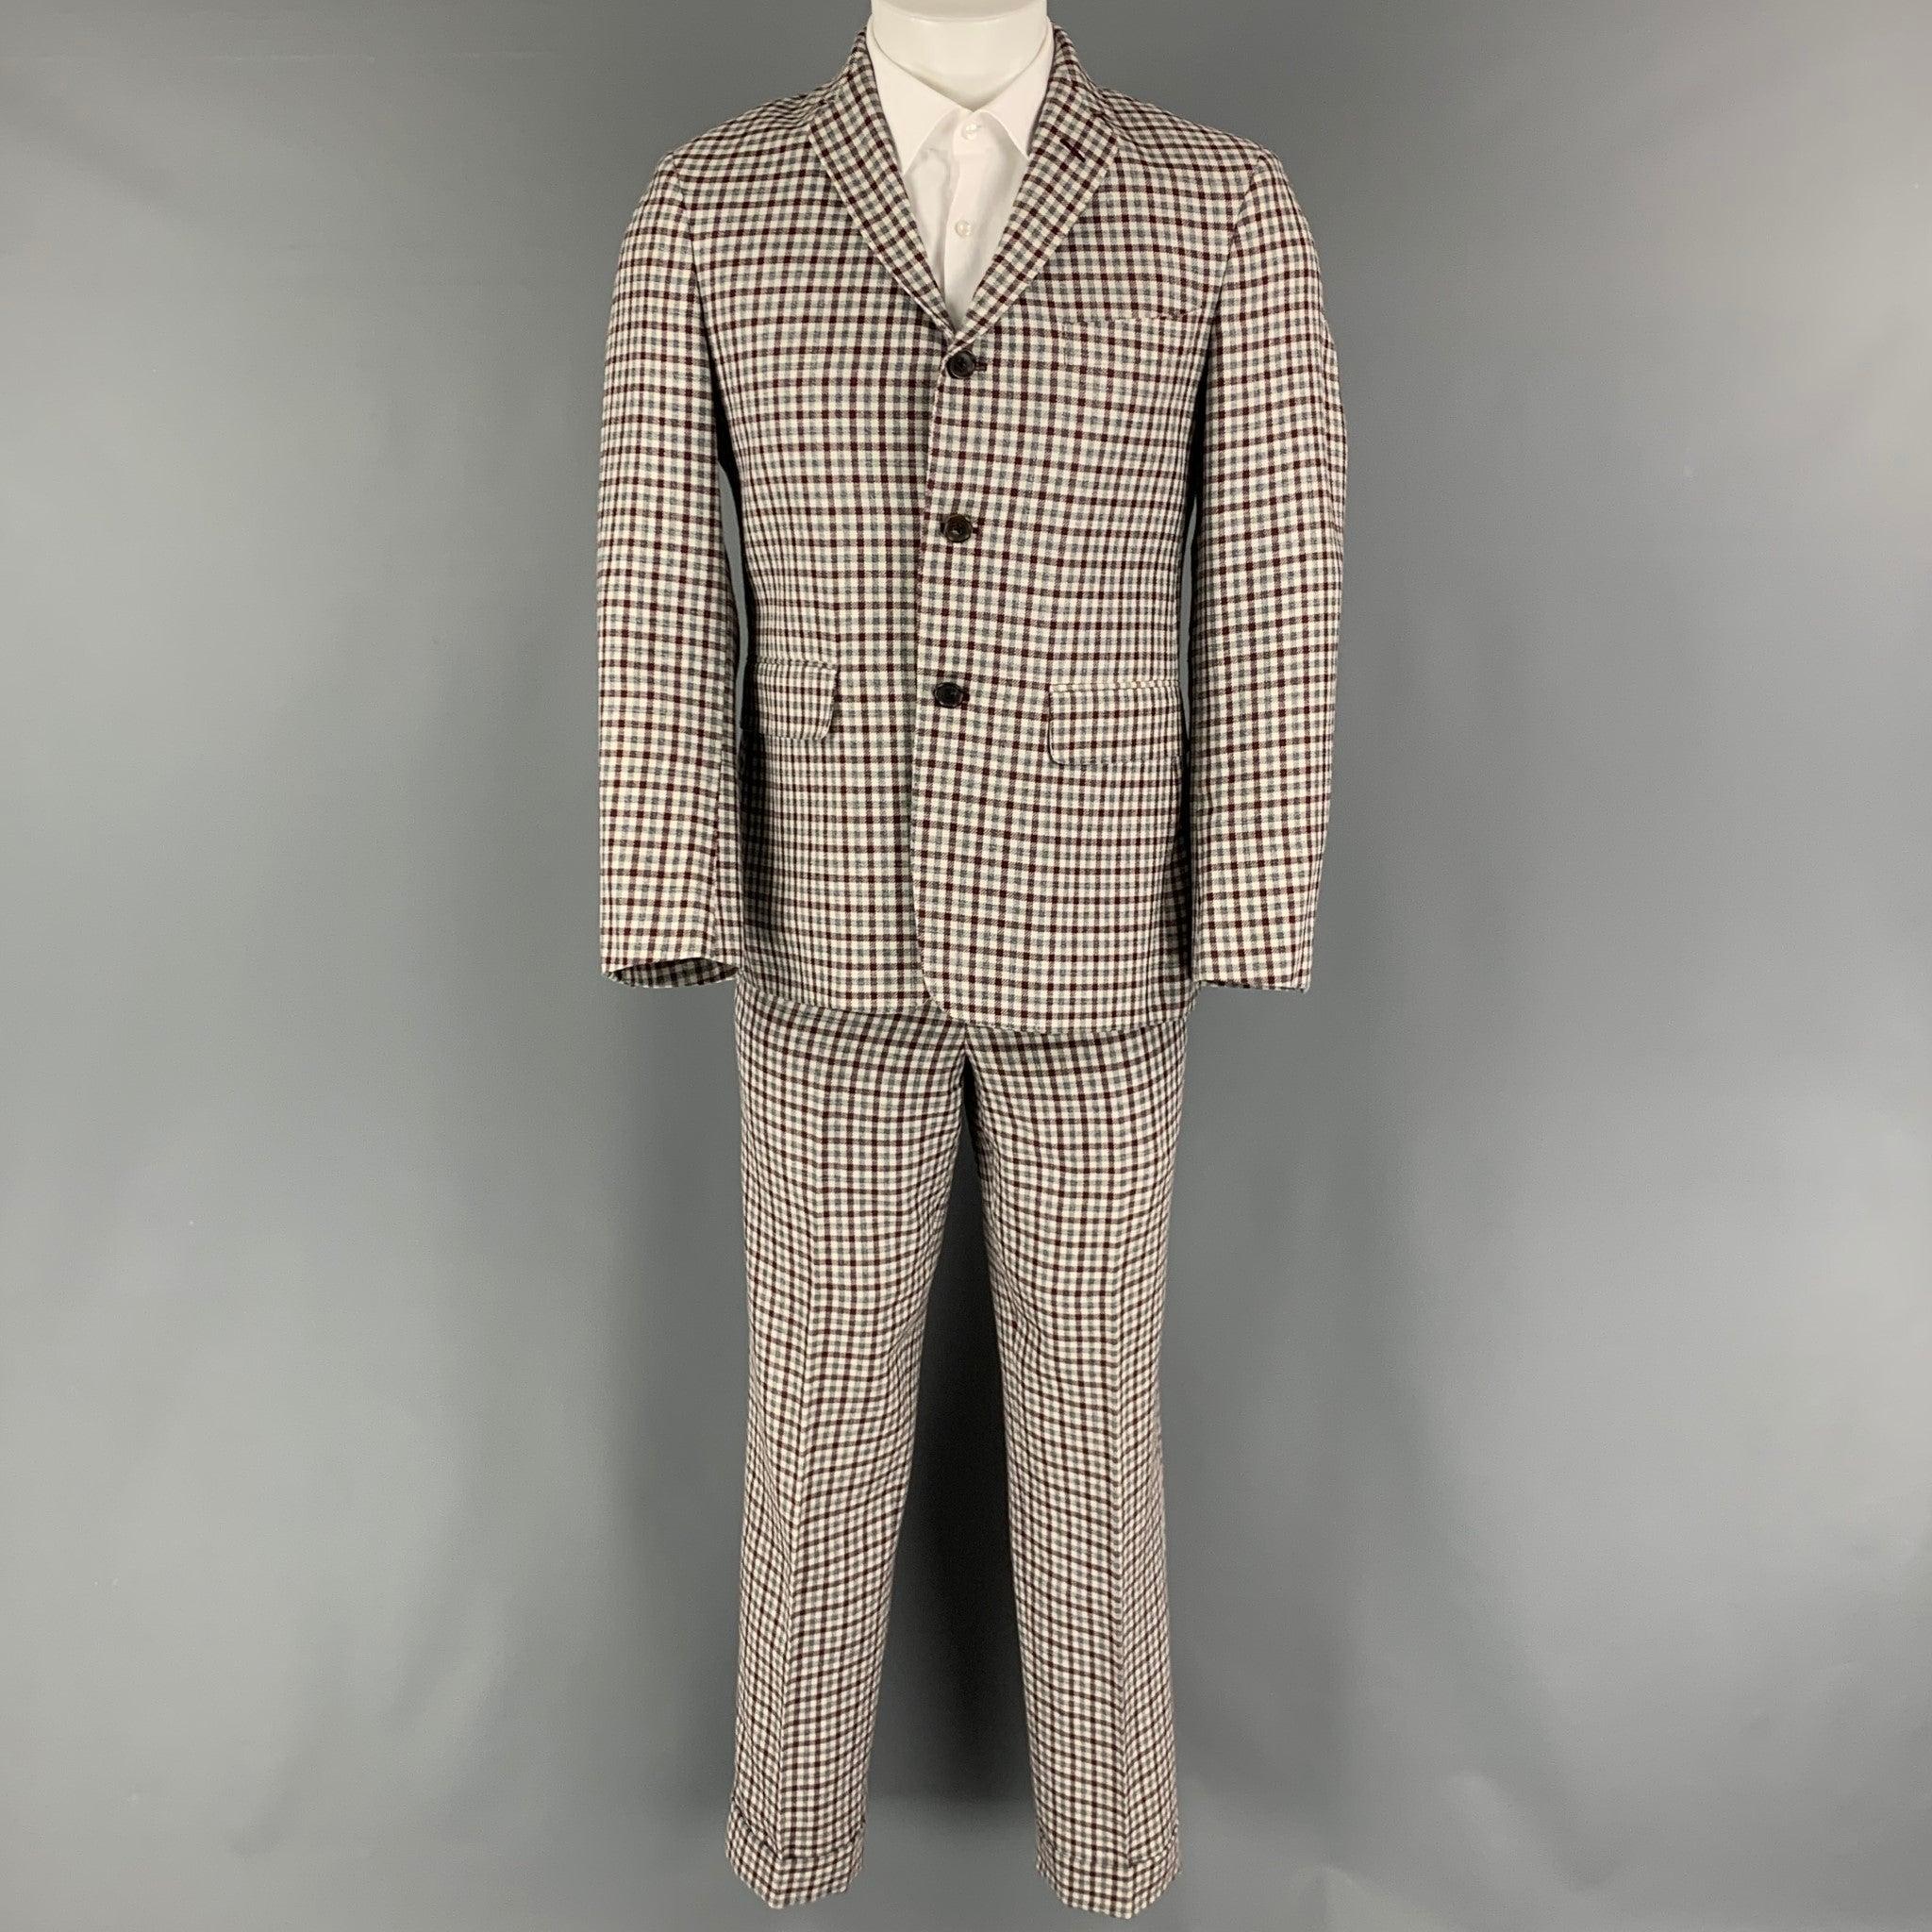 BLACK FLEECE suit comes in a burgundy, cream and grey checkered wool blend woven with a full liner and includes a single breasted, three button sport coat with a notch lapel and matching flat front trousers. Made in USA.Very Good Pre-Owned